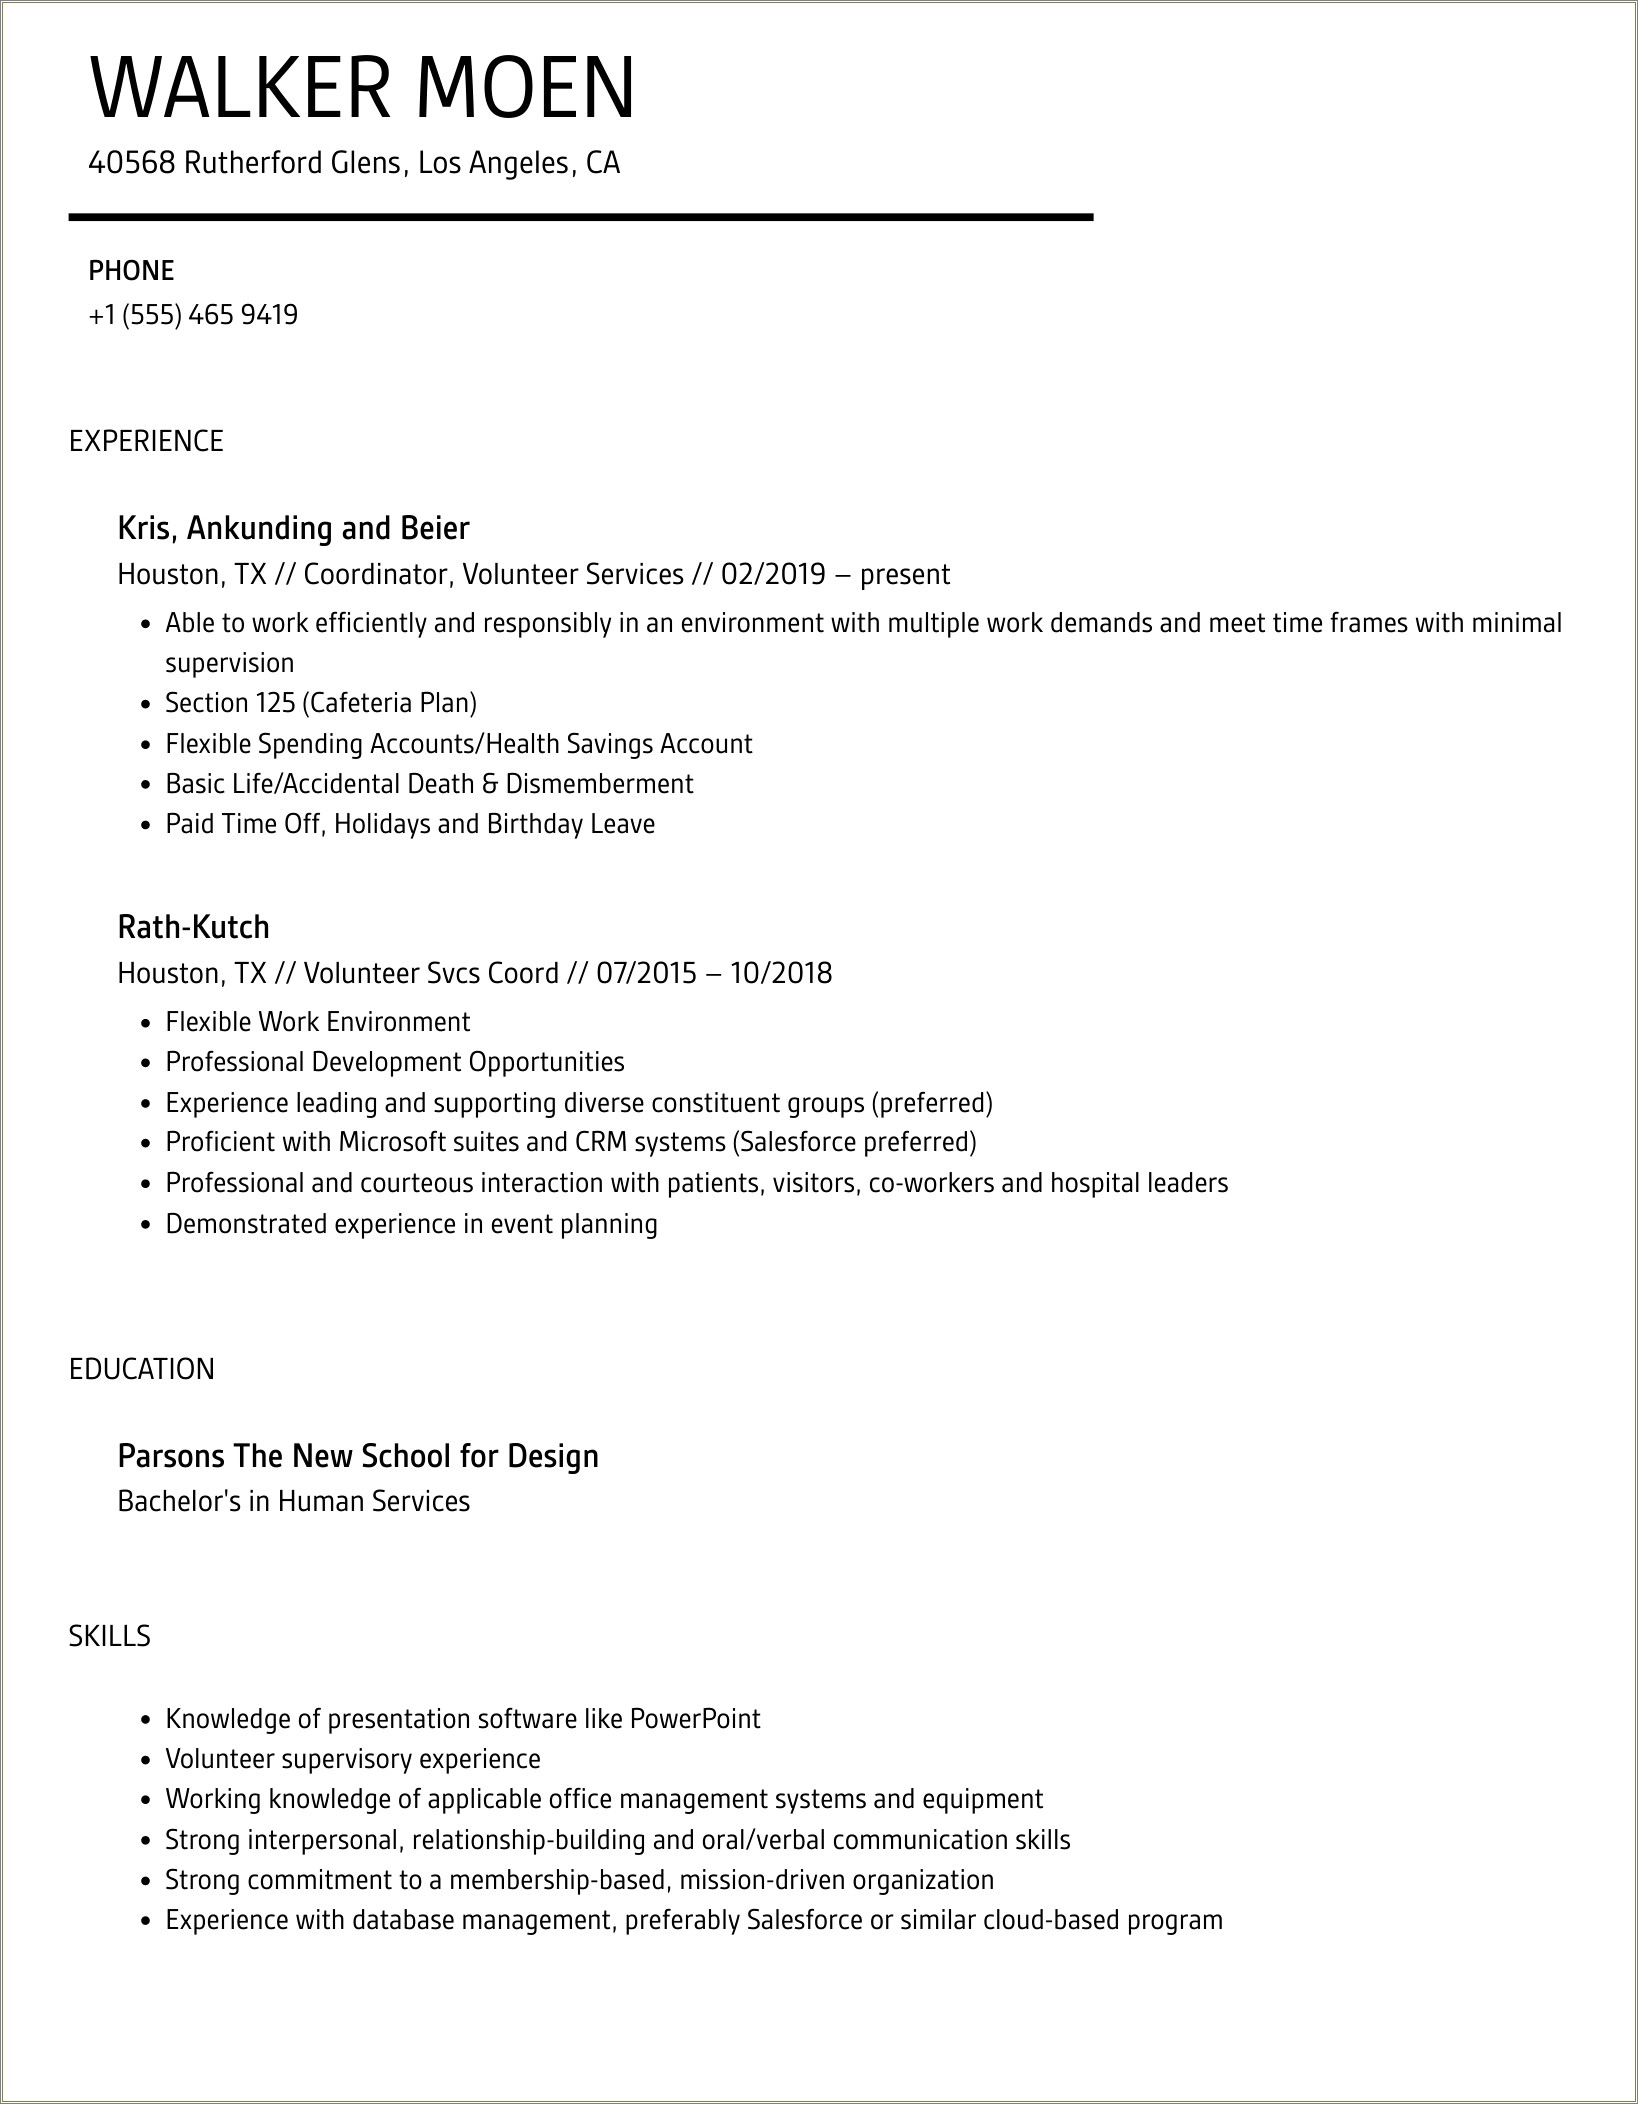 Resume With Work Education And Volunteer Experience